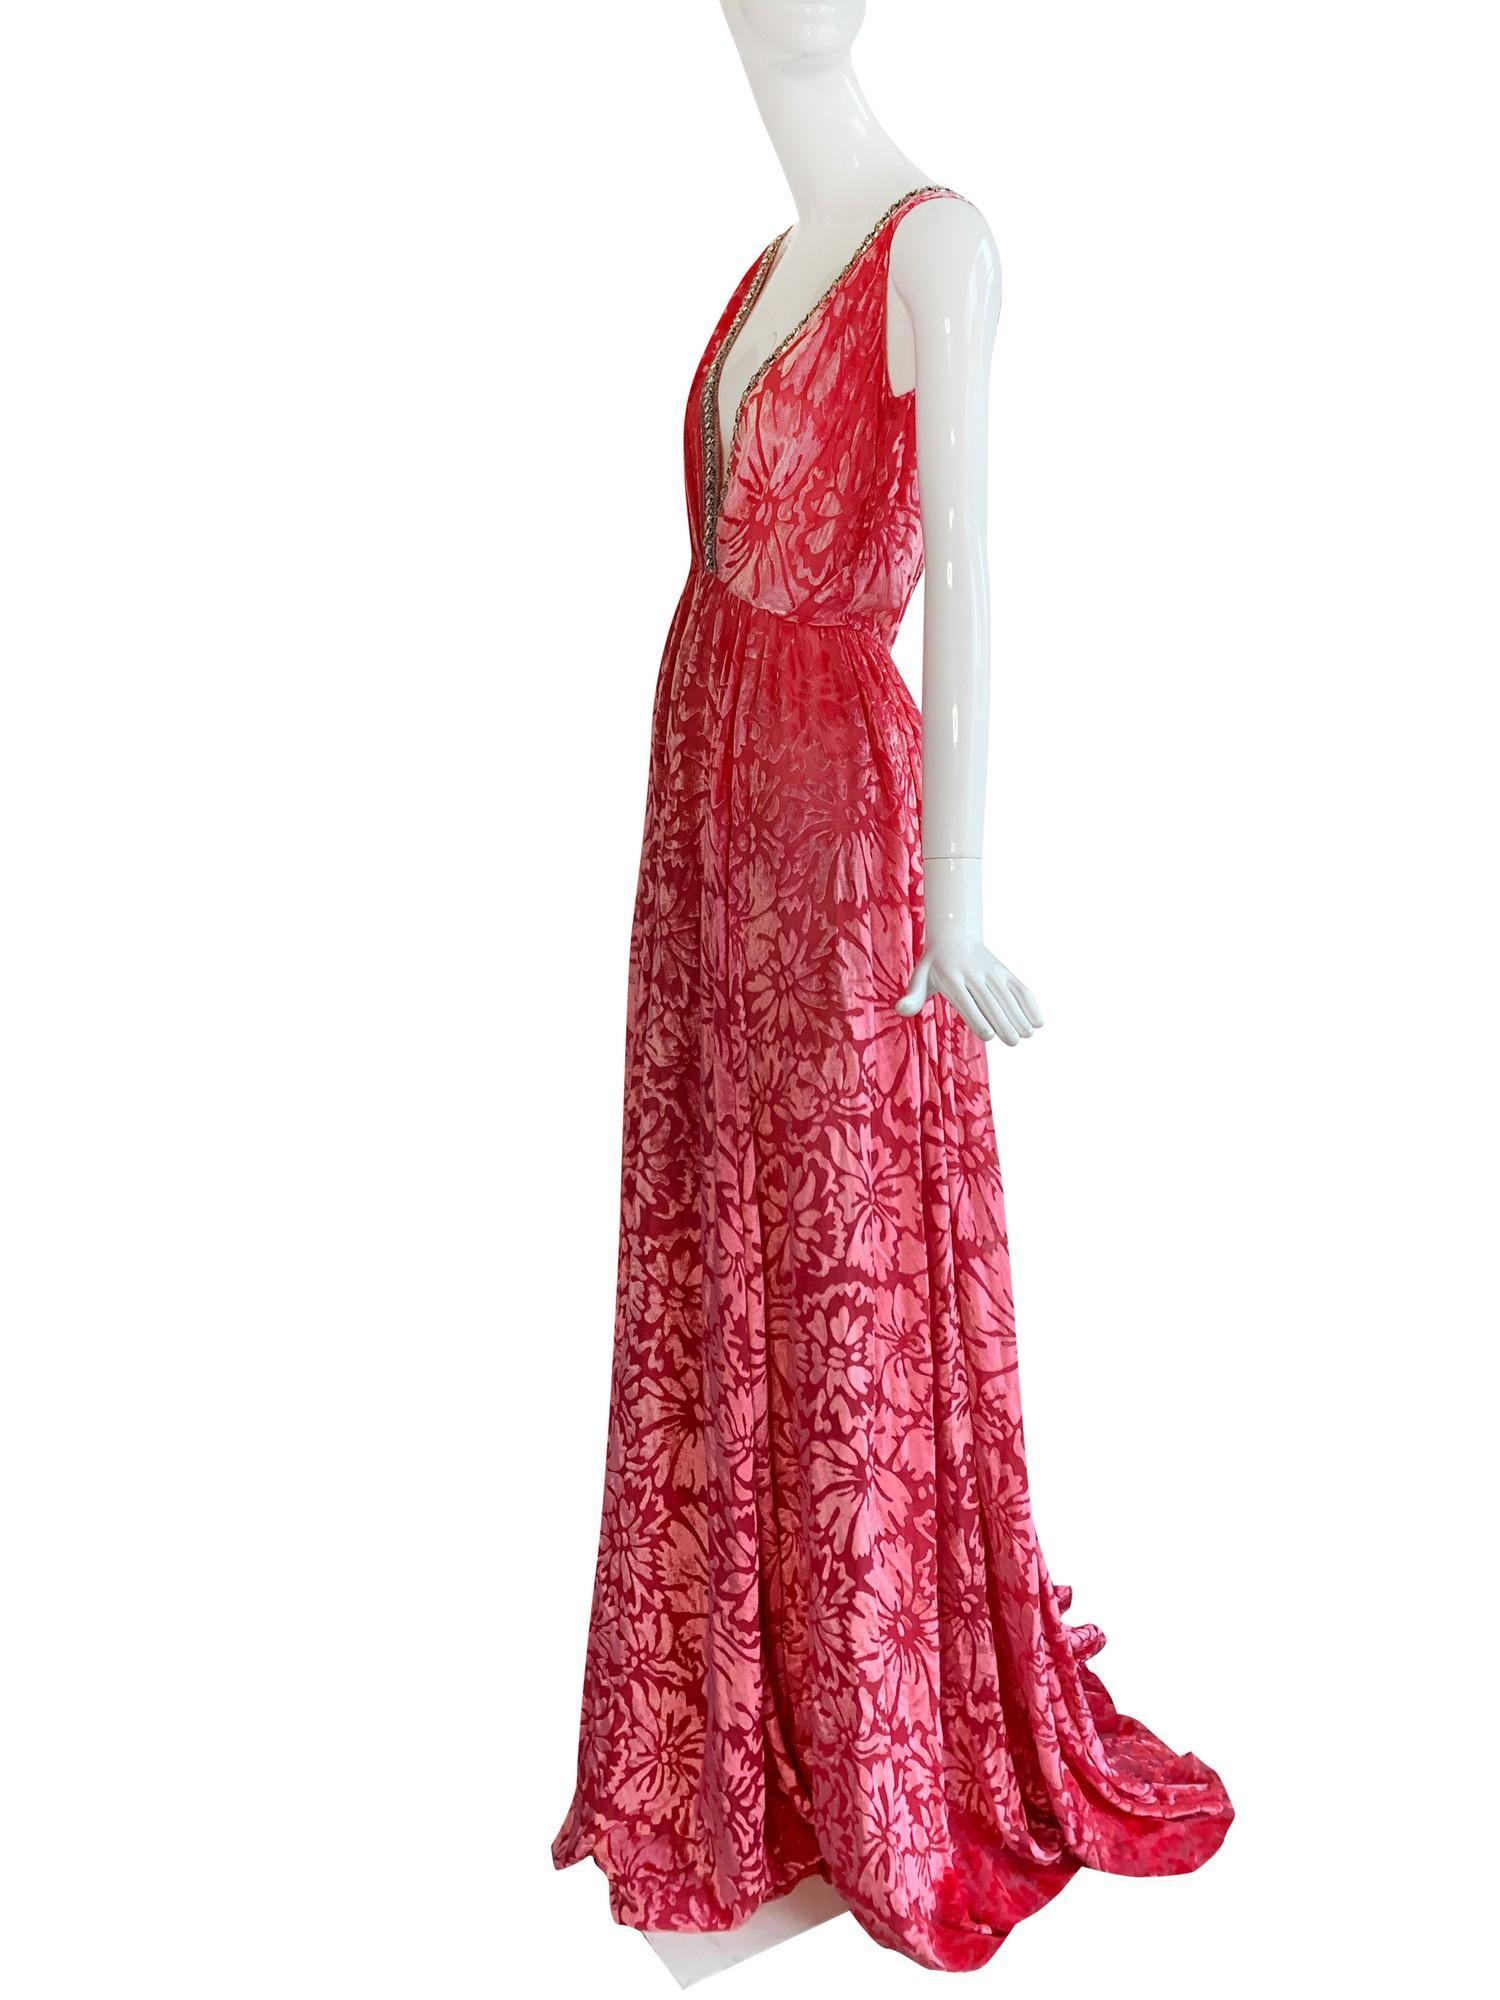 Christian Dior by John Galliano Pink Devore Velvet Evening Gown w/Jeweled Trim In Excellent Condition For Sale In Studio City, CA